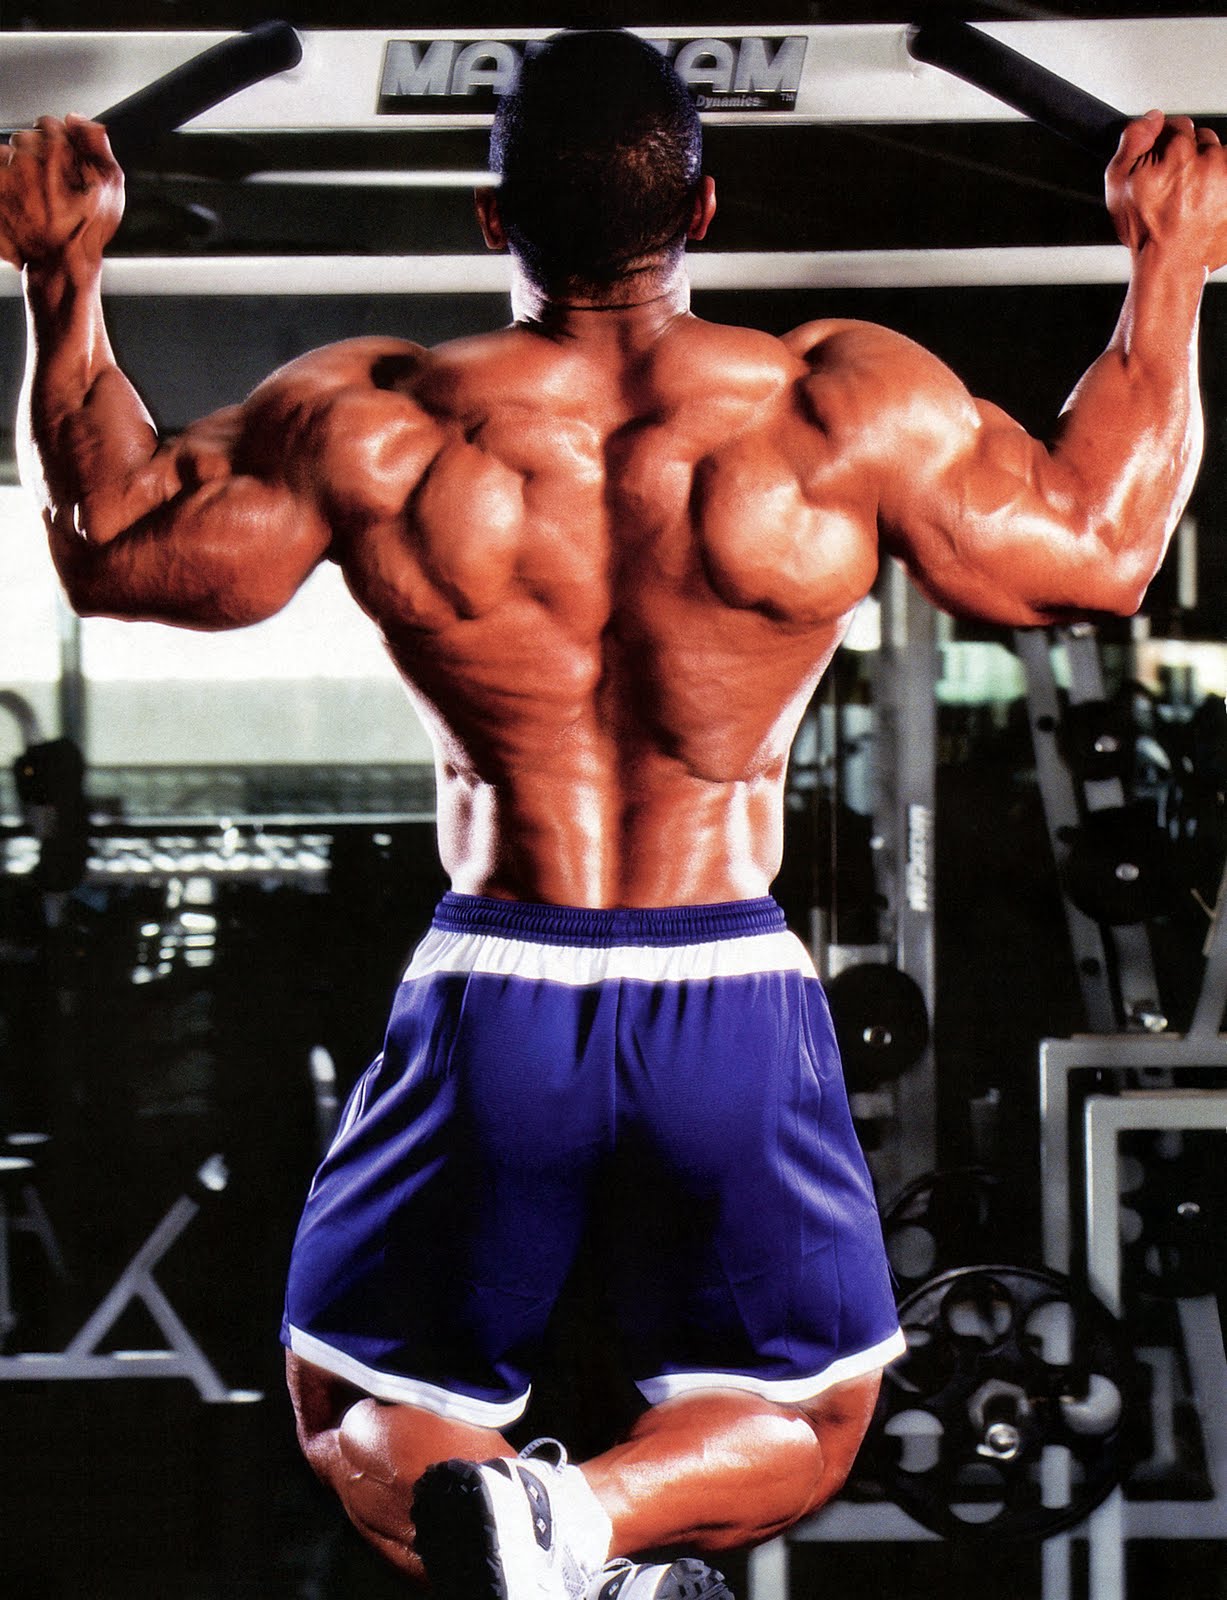 Strong back. Strong*. Pumping Iron Power.